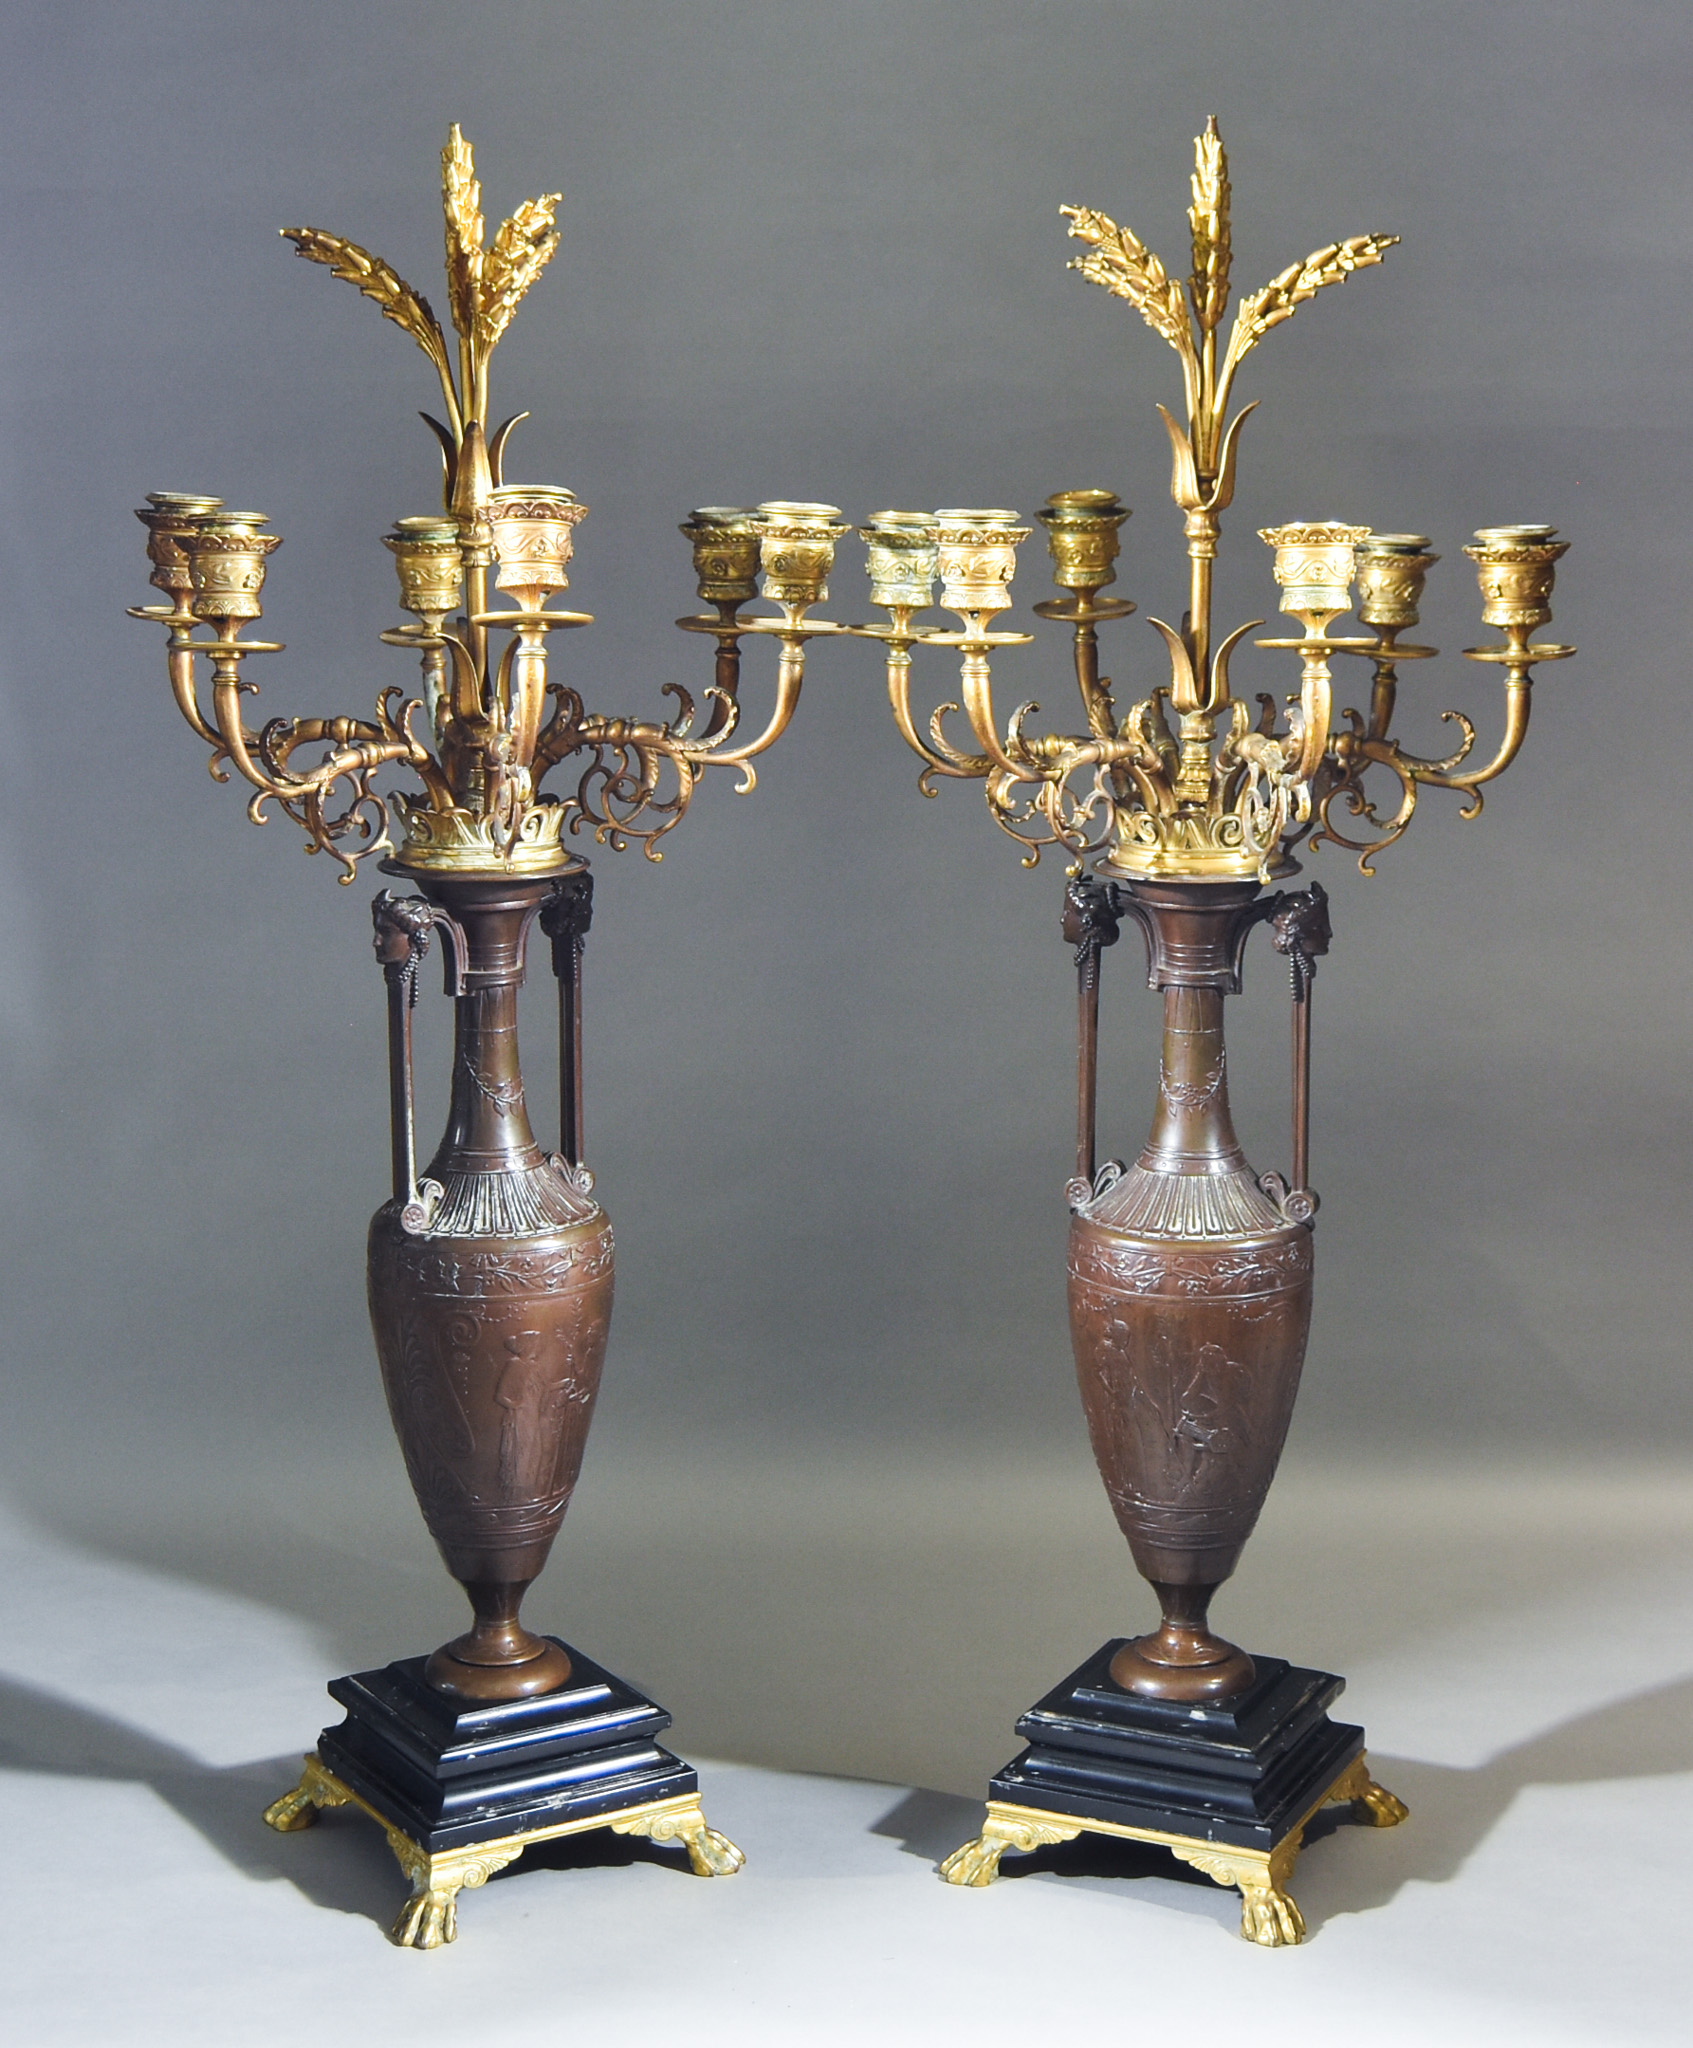 Henry Cahieux (1825-1854) - Pair of brown patinated bronze and ormolu mounted six branch candelabra,